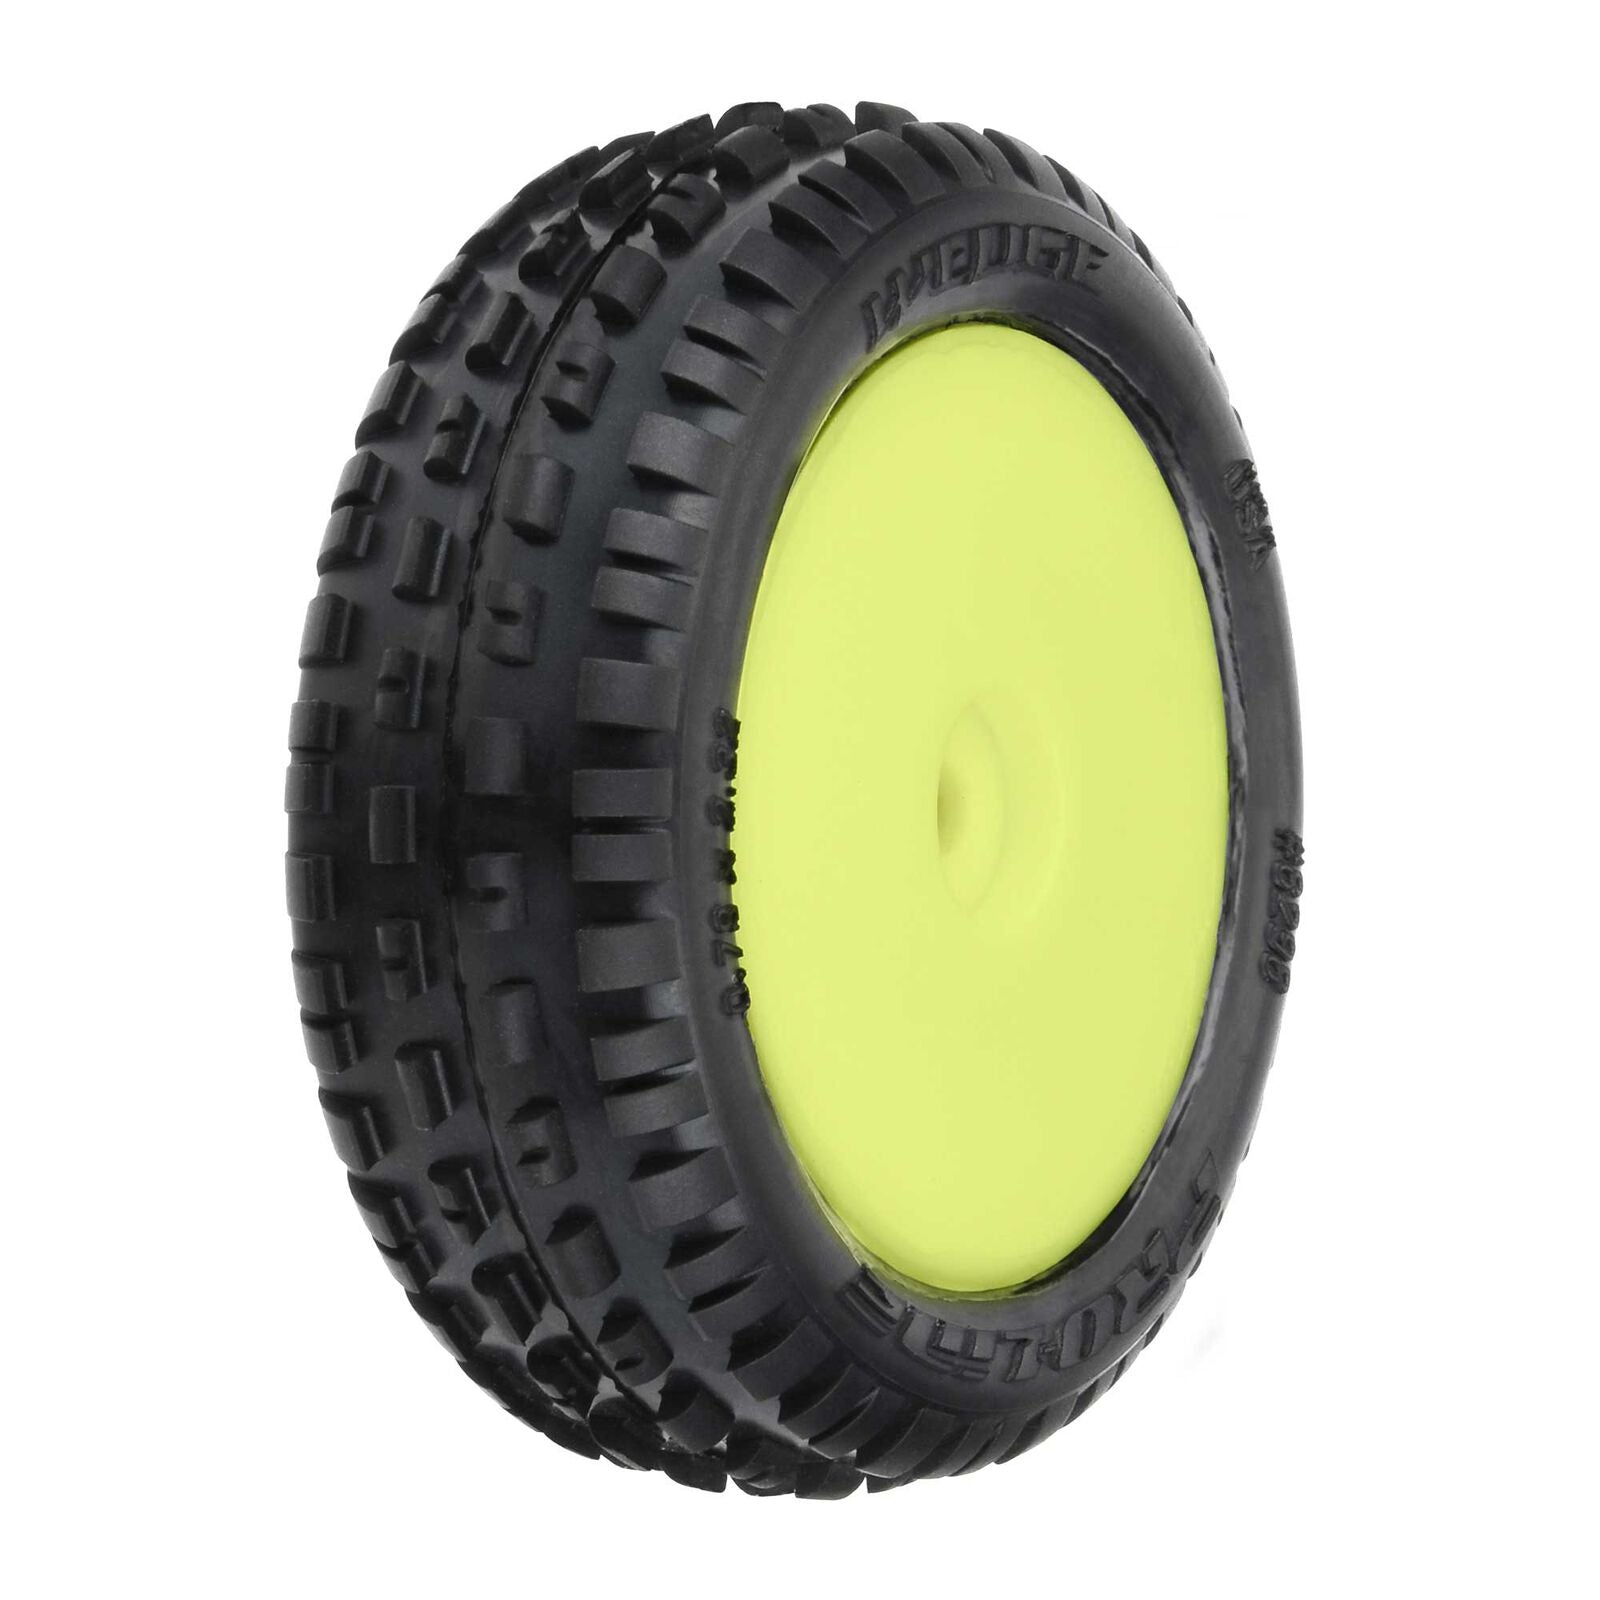 PROLINE 8298-12 1/16 Wedge Front Mini Pre-Mounted Tires 8mm (2) Yellow